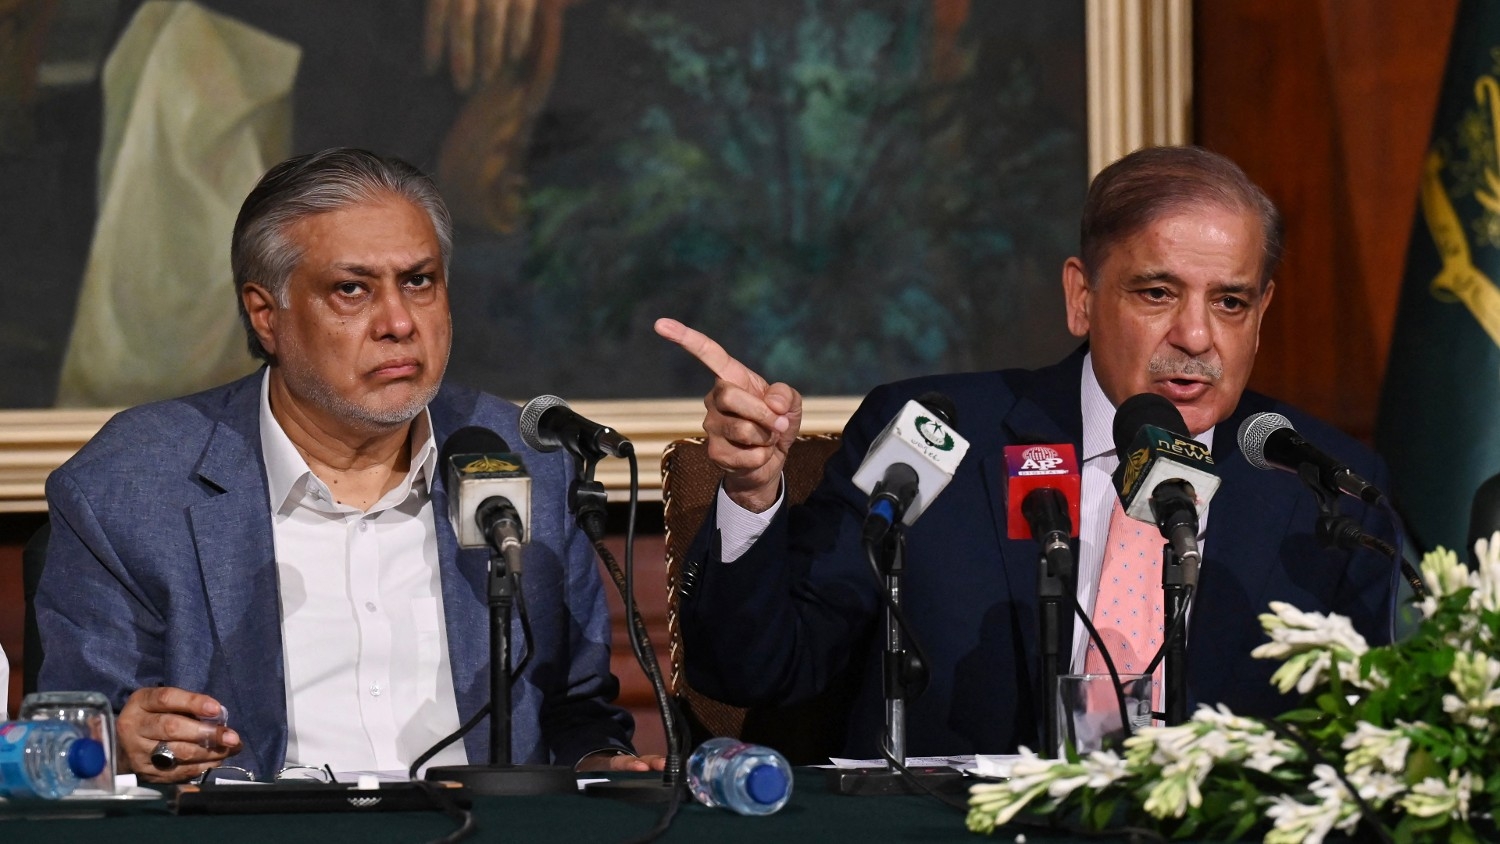 Pakistan's Prime Minister Shehbaz Sharif (R) and Pakistan's Finance Minister Ishaq Dar (L) address a press conference in Lahore on 30 June 2023.